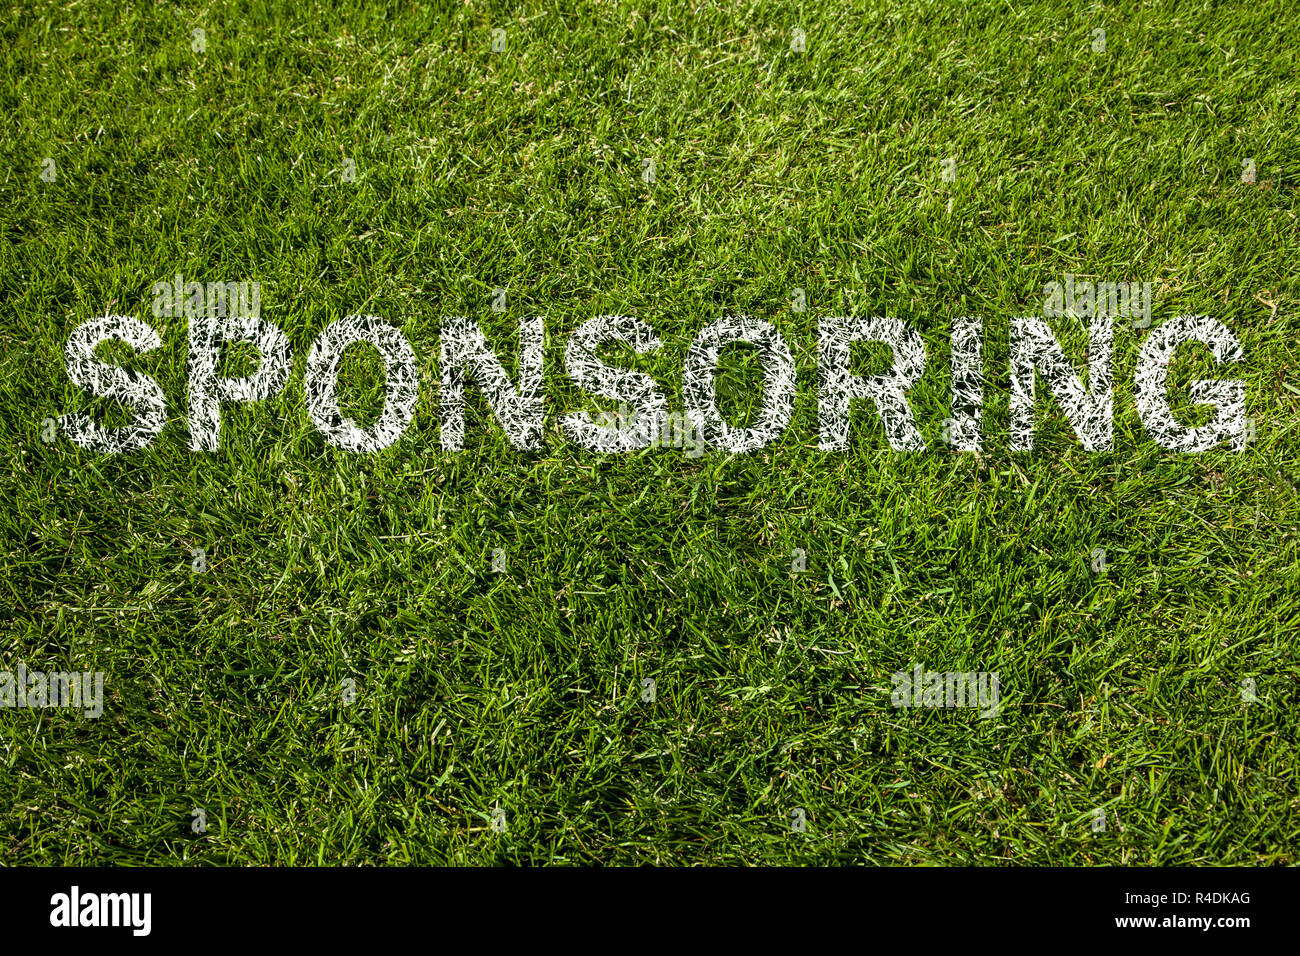 sponsoring text on meadow Stock Photo